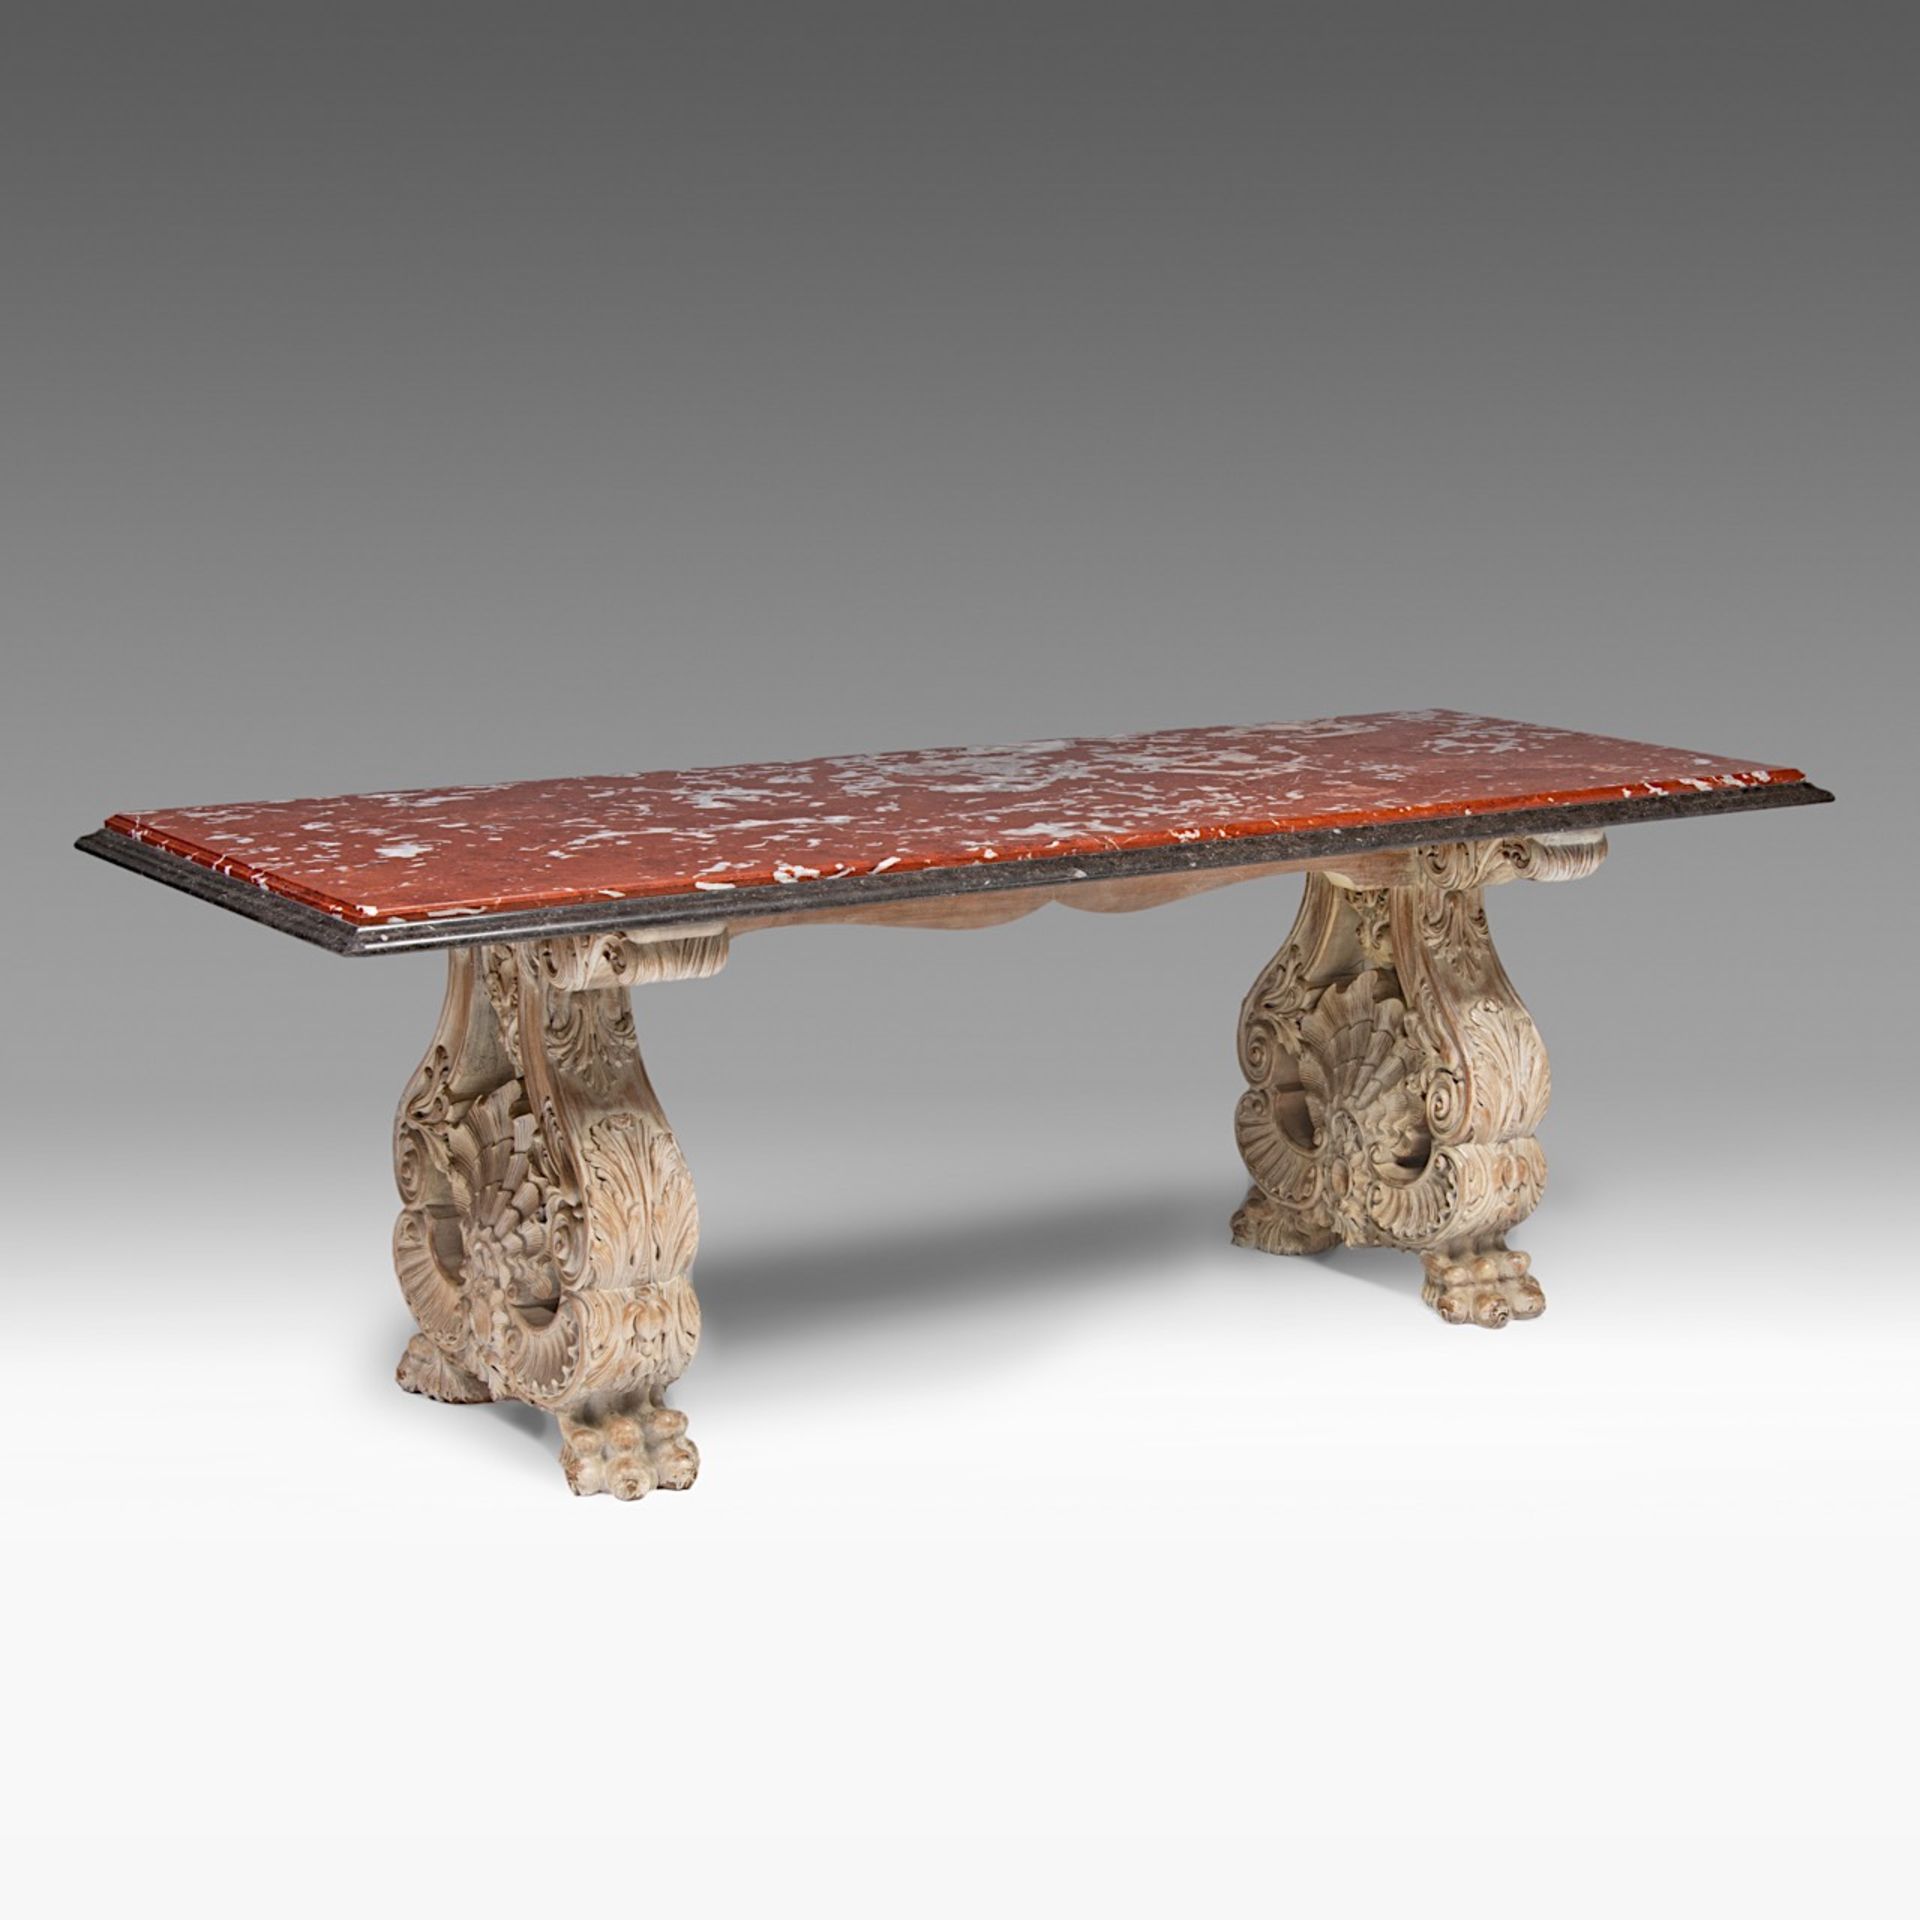 A Renaissance-style marble-topped table with sculpted wood trestles, H 76 cm - W 219 cm - D 84 cm - Image 2 of 6